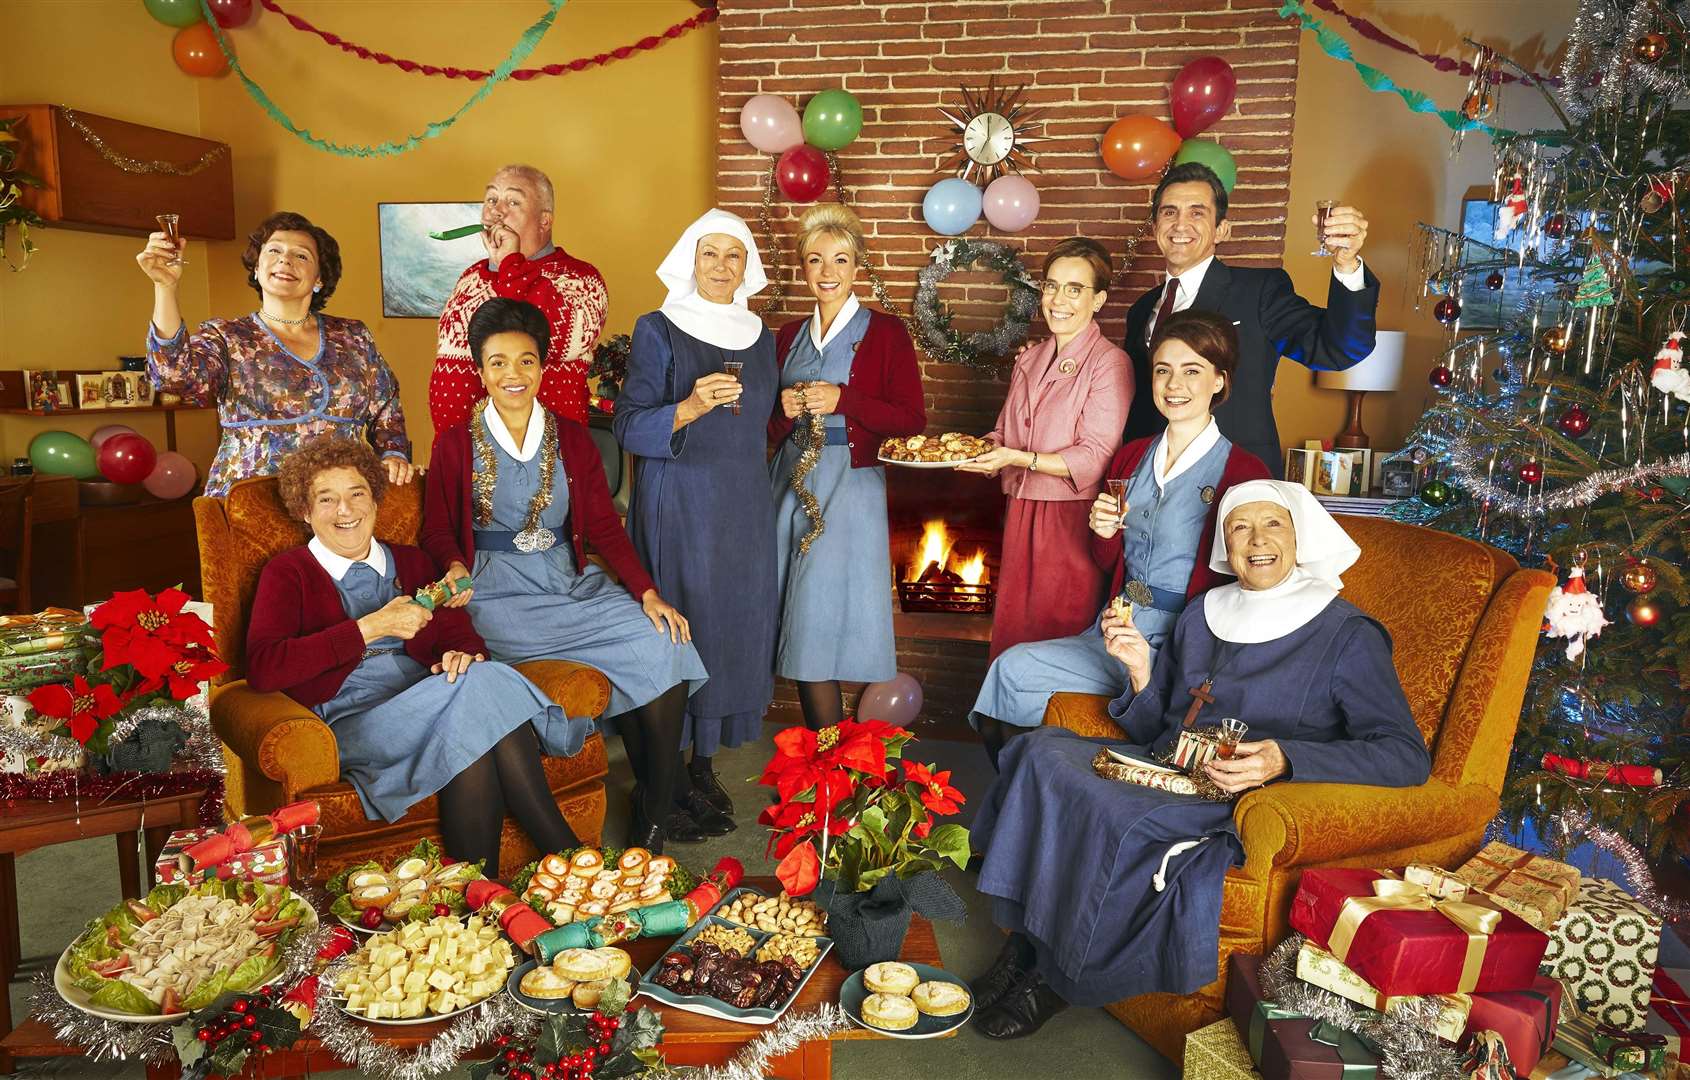 The Call The Midwife Christmas Special Picture: Neal Street, Nicky Johnston